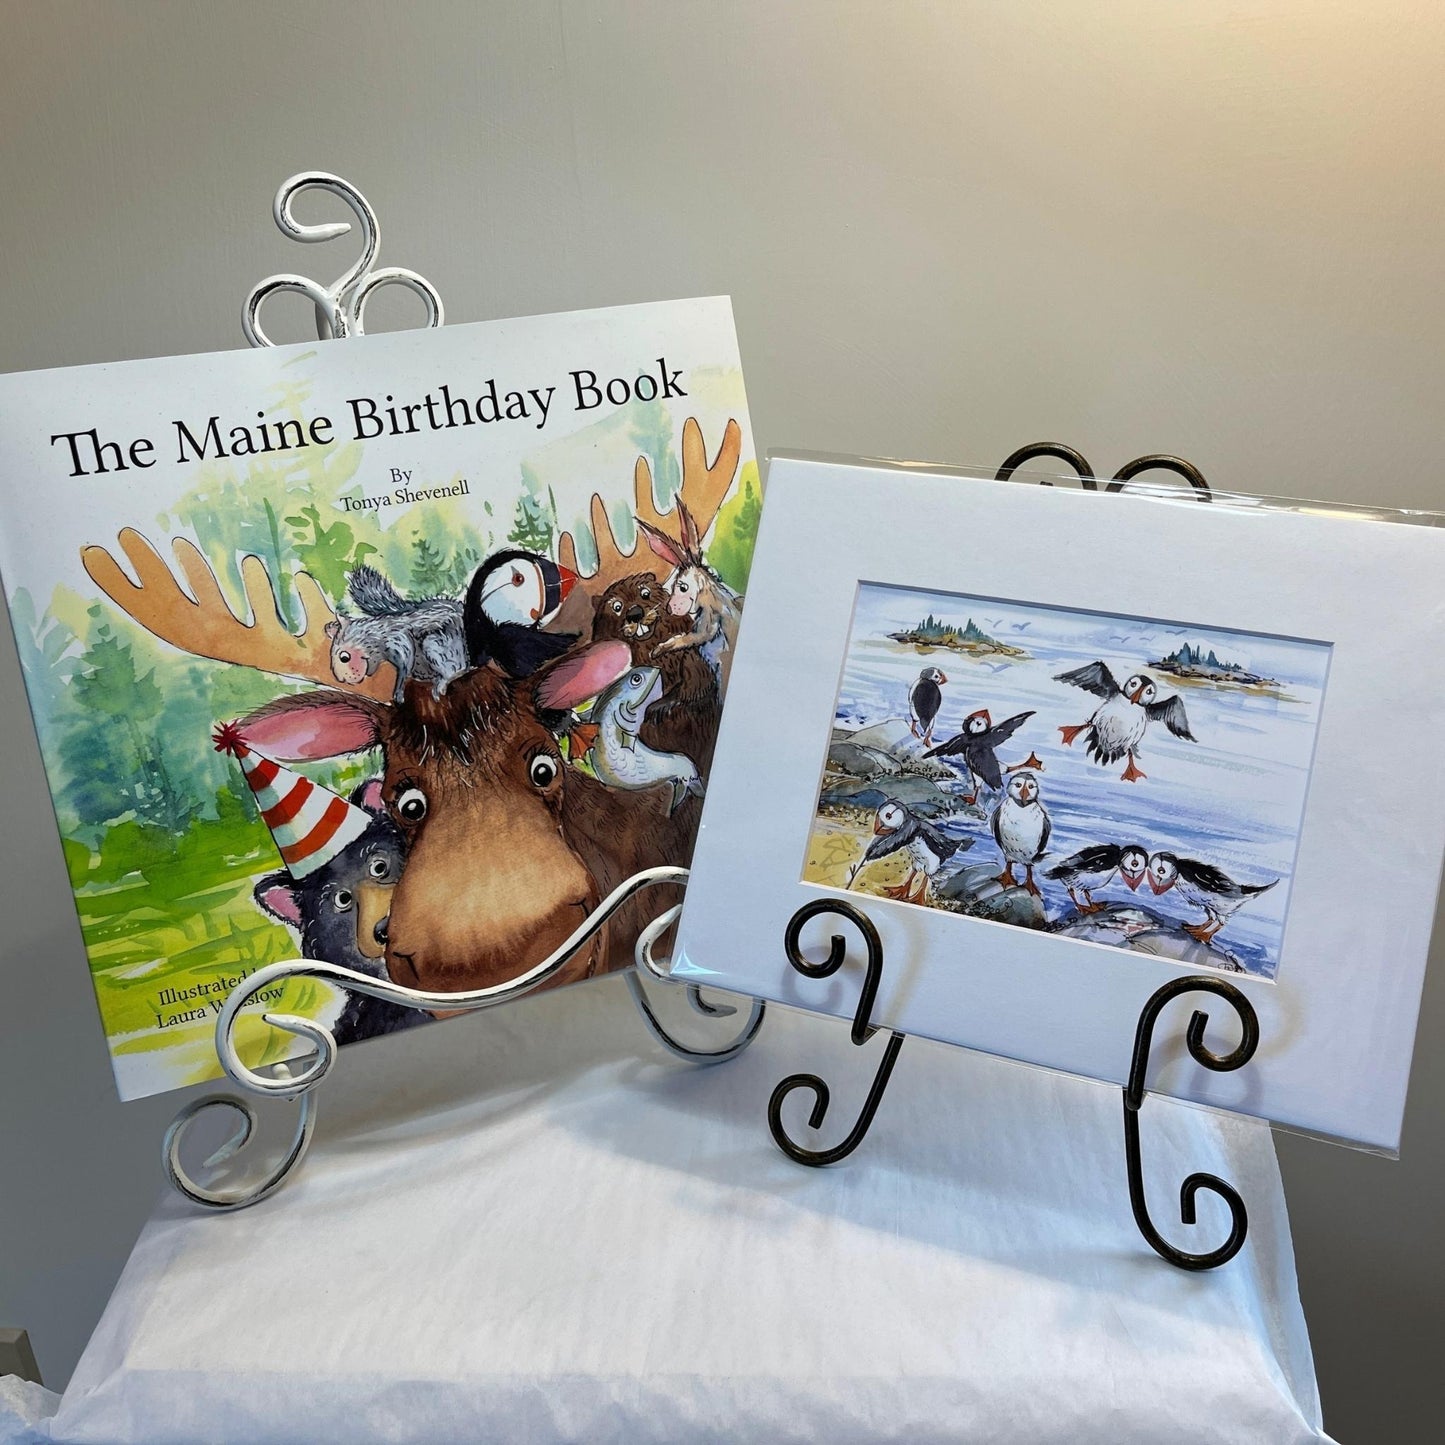 Maine Birthday Book and Puffins Playing Art Print